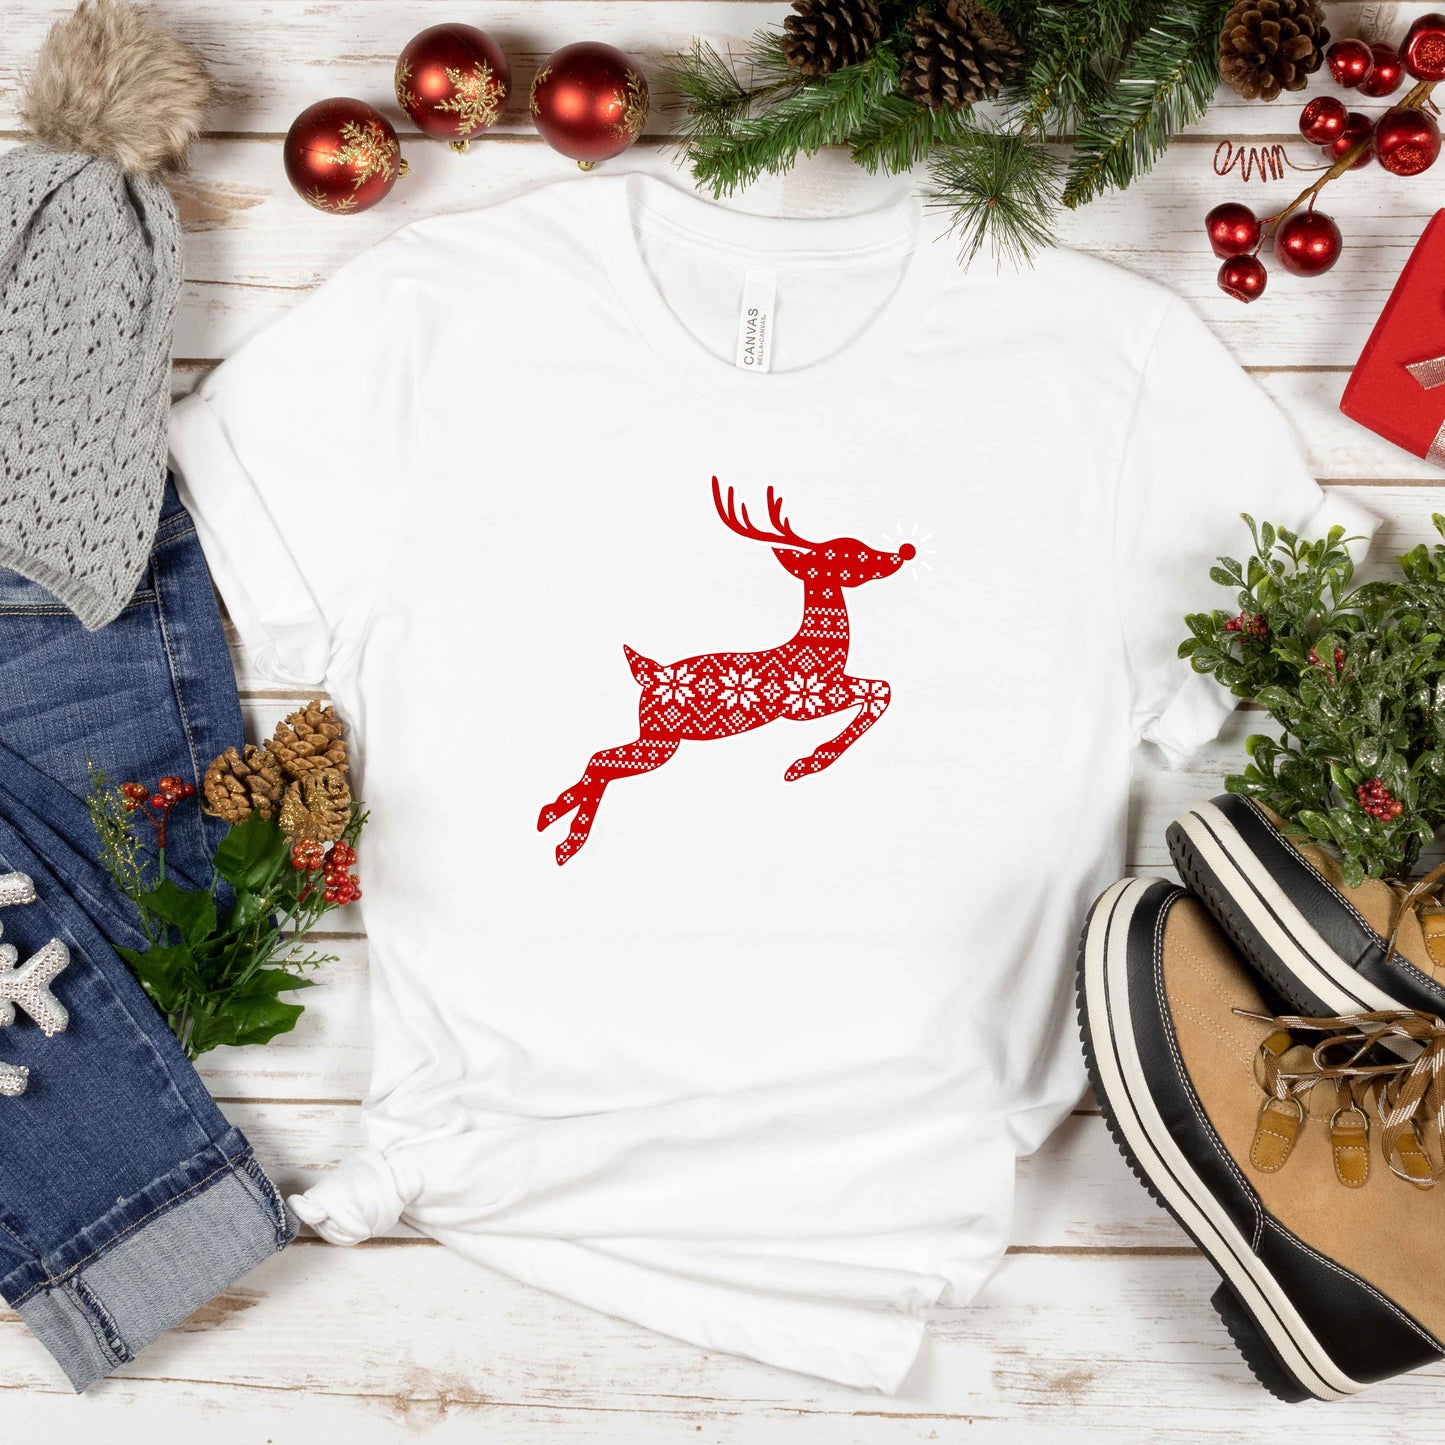 Clearance Rudolph Sweater | Short Sleeve Graphic Tee